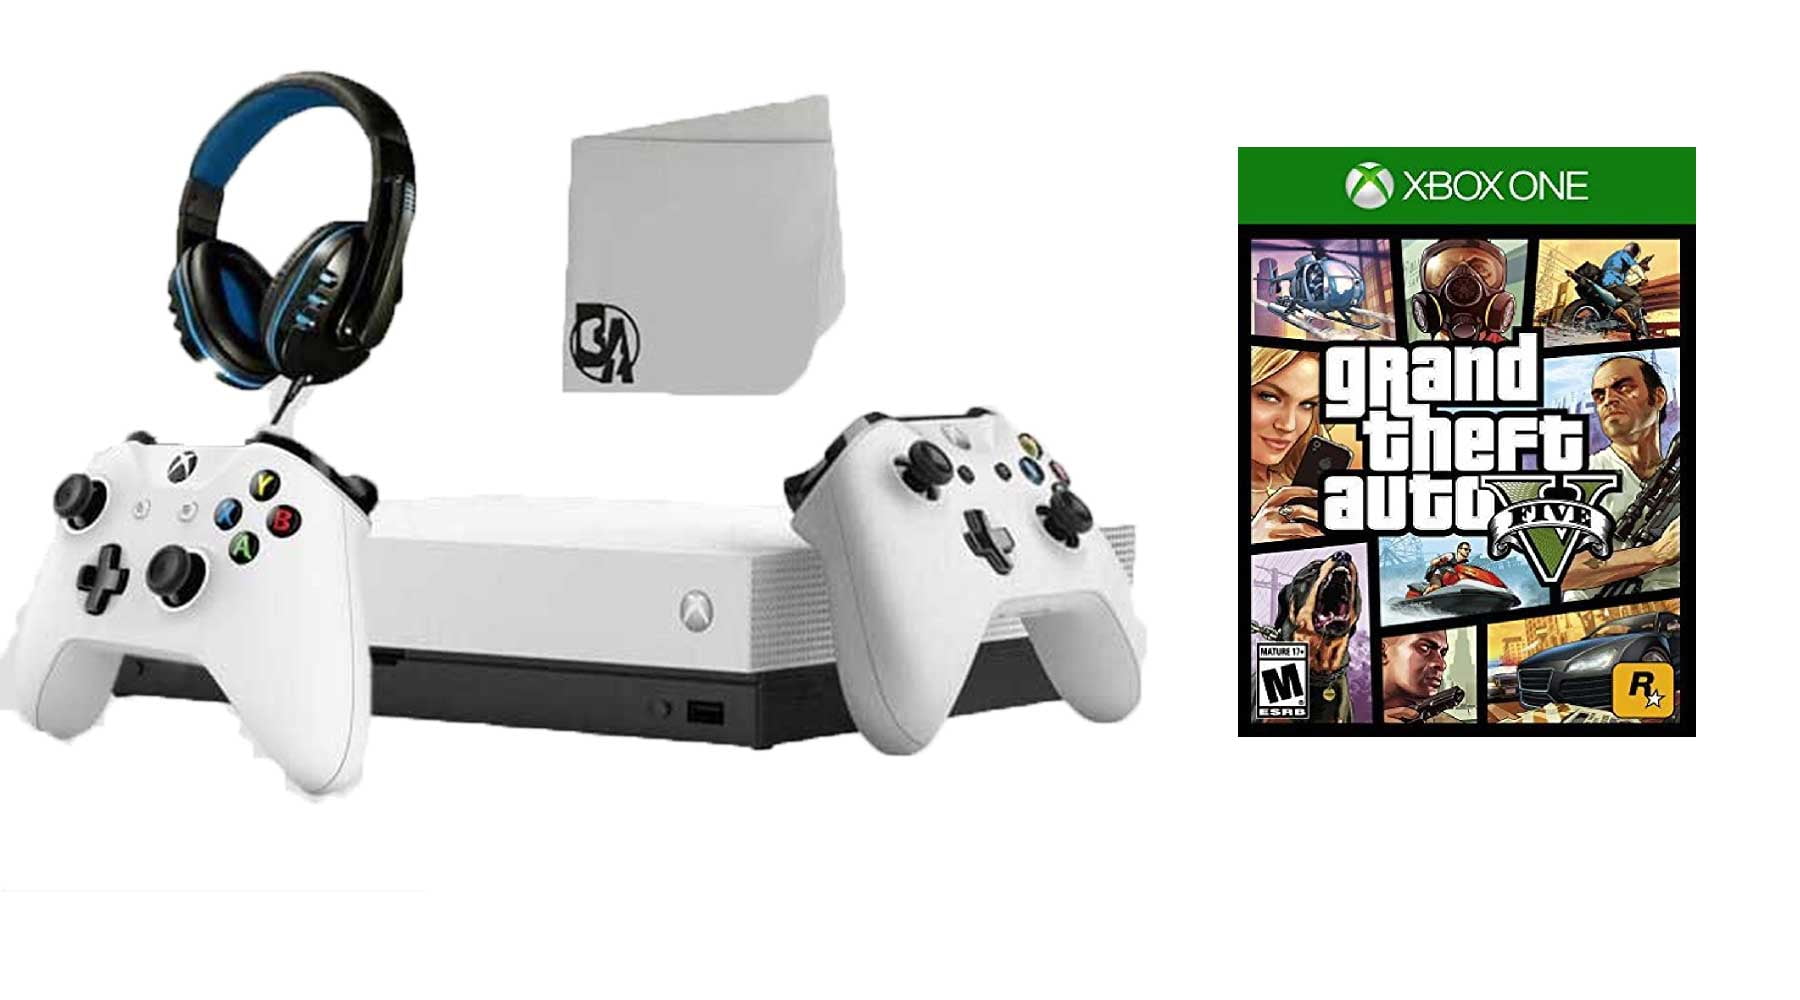 Microsoft Factory Recertified XBOX One X BUNDLE-includes XBOX One X console  and Microsoft wireless controller plus xTalk one headset & Grand Theft